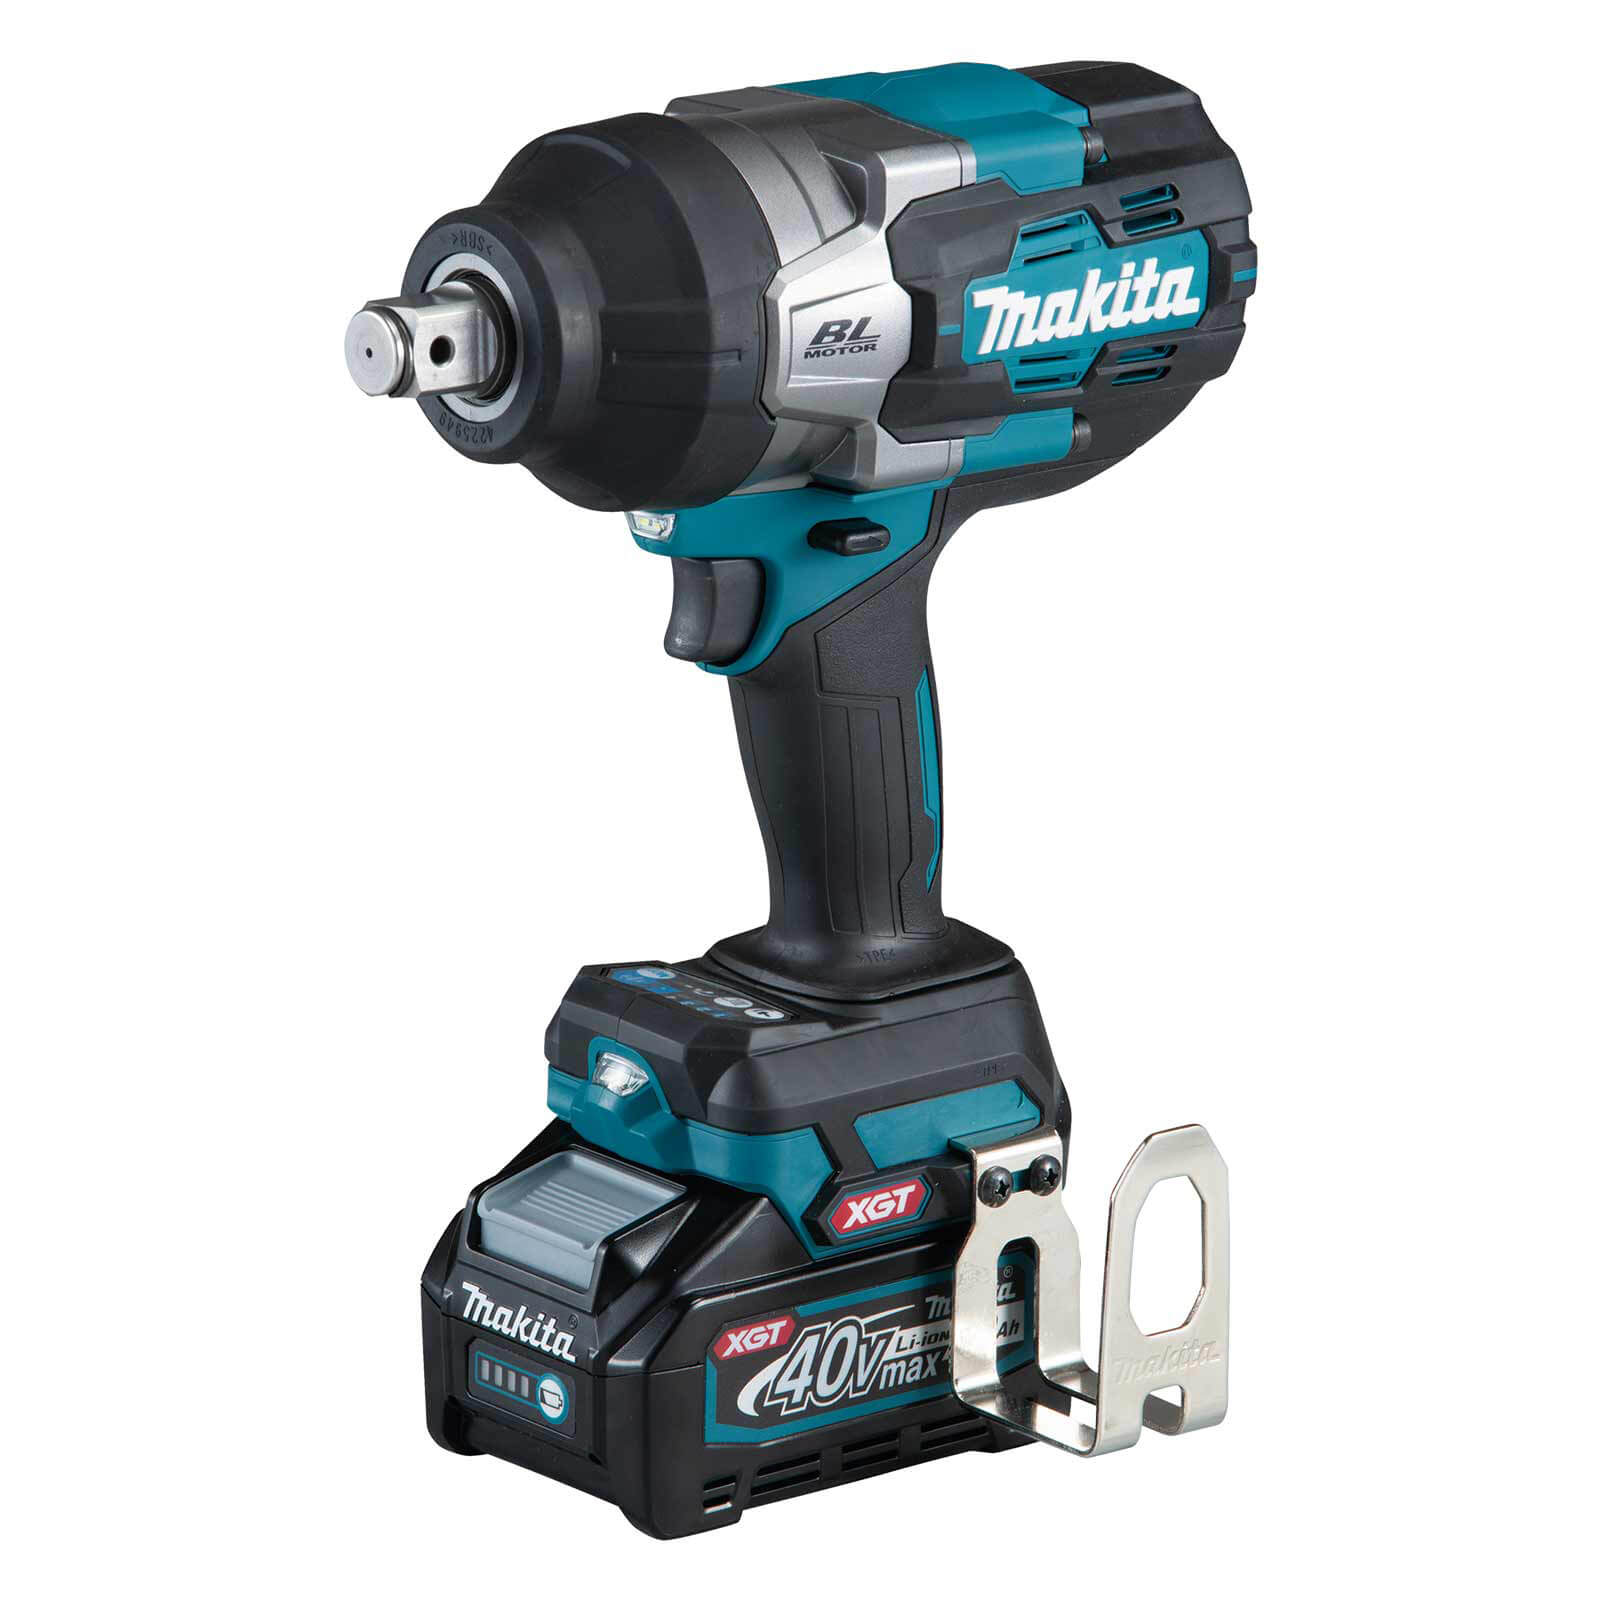 Image of Makita TW001G 40v Max XGT Cordless Brushless 3/4" Drive Impact Wrench No Batteries No Charger No Case